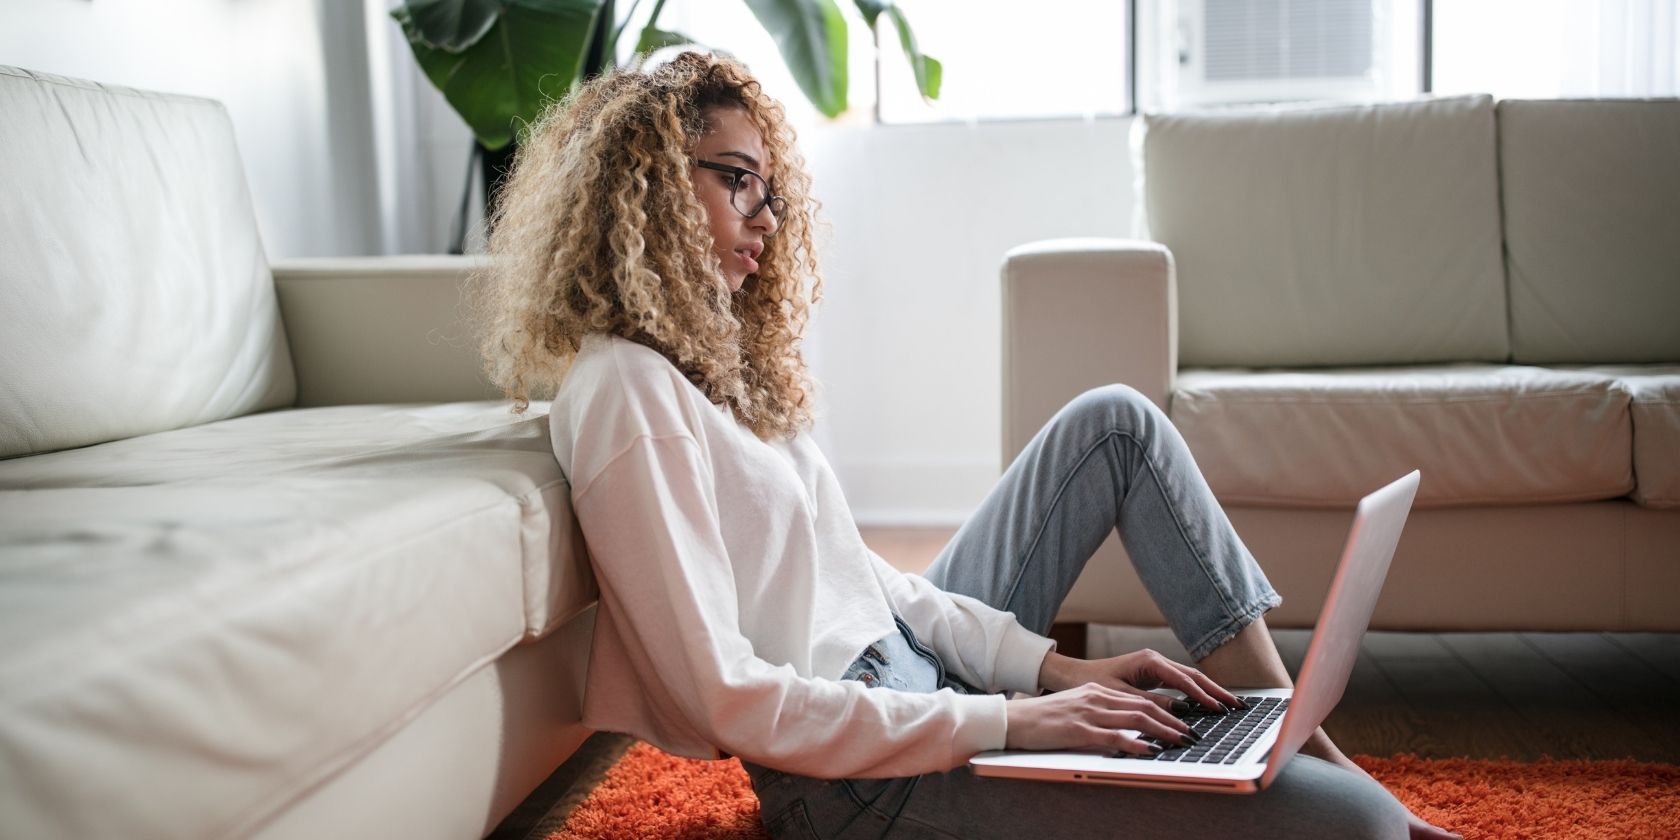 7 Sites to Find Entry-Level Remote Jobs